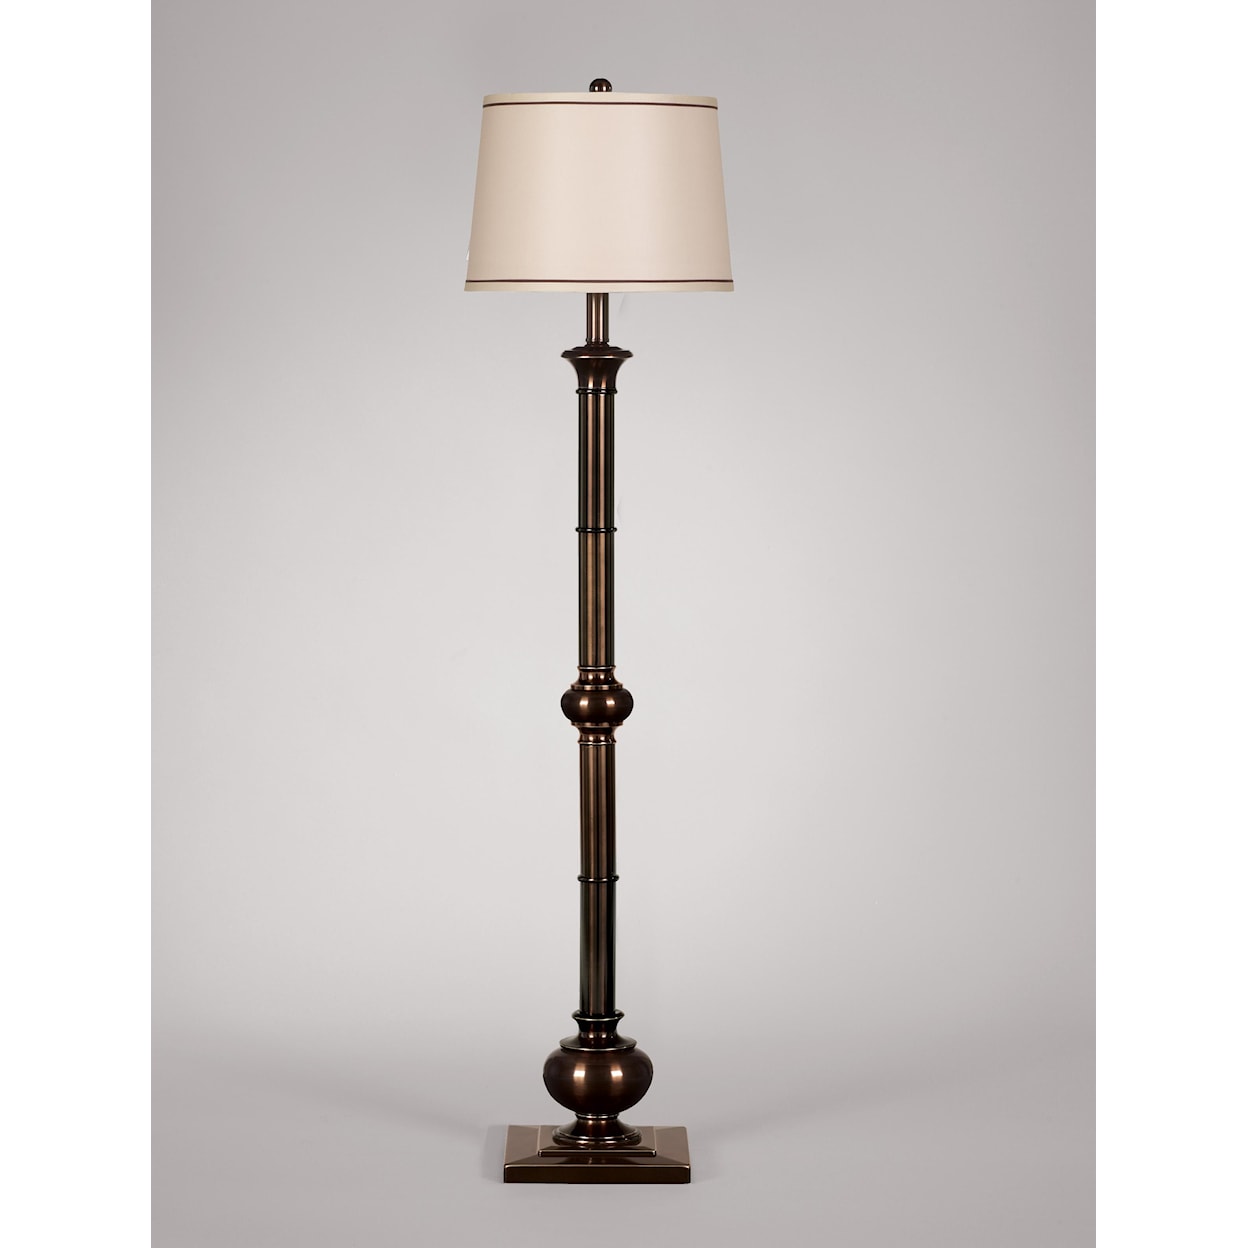 Signature Design by Ashley Lamps - Traditional Classics Oakleigh Metal Floor Lamp